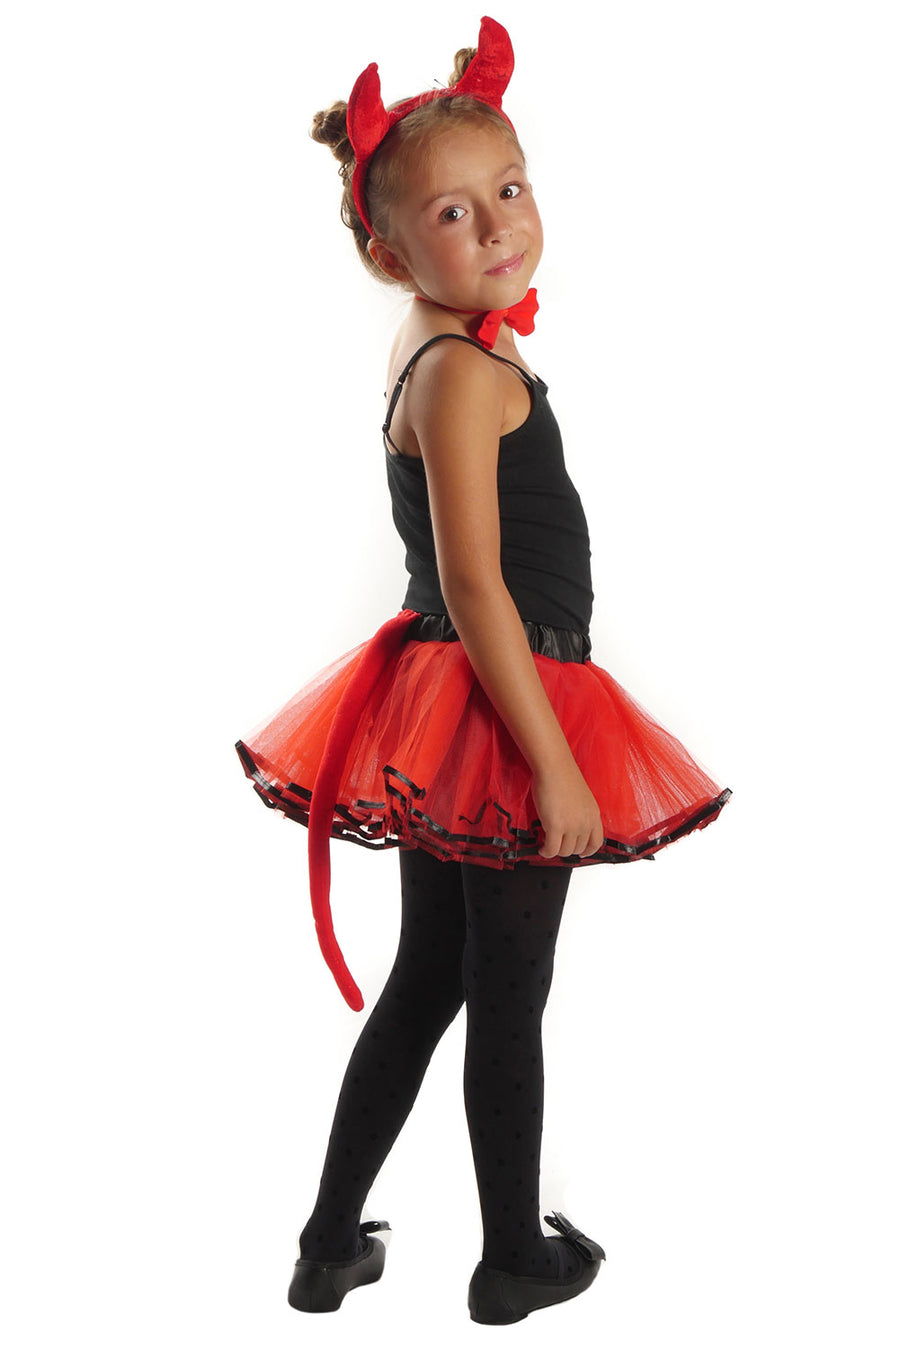 Halloween Red Devil Costume Set: Tutu, Horns, Bow, and Tail for 2-10 Years - Vacay Land 